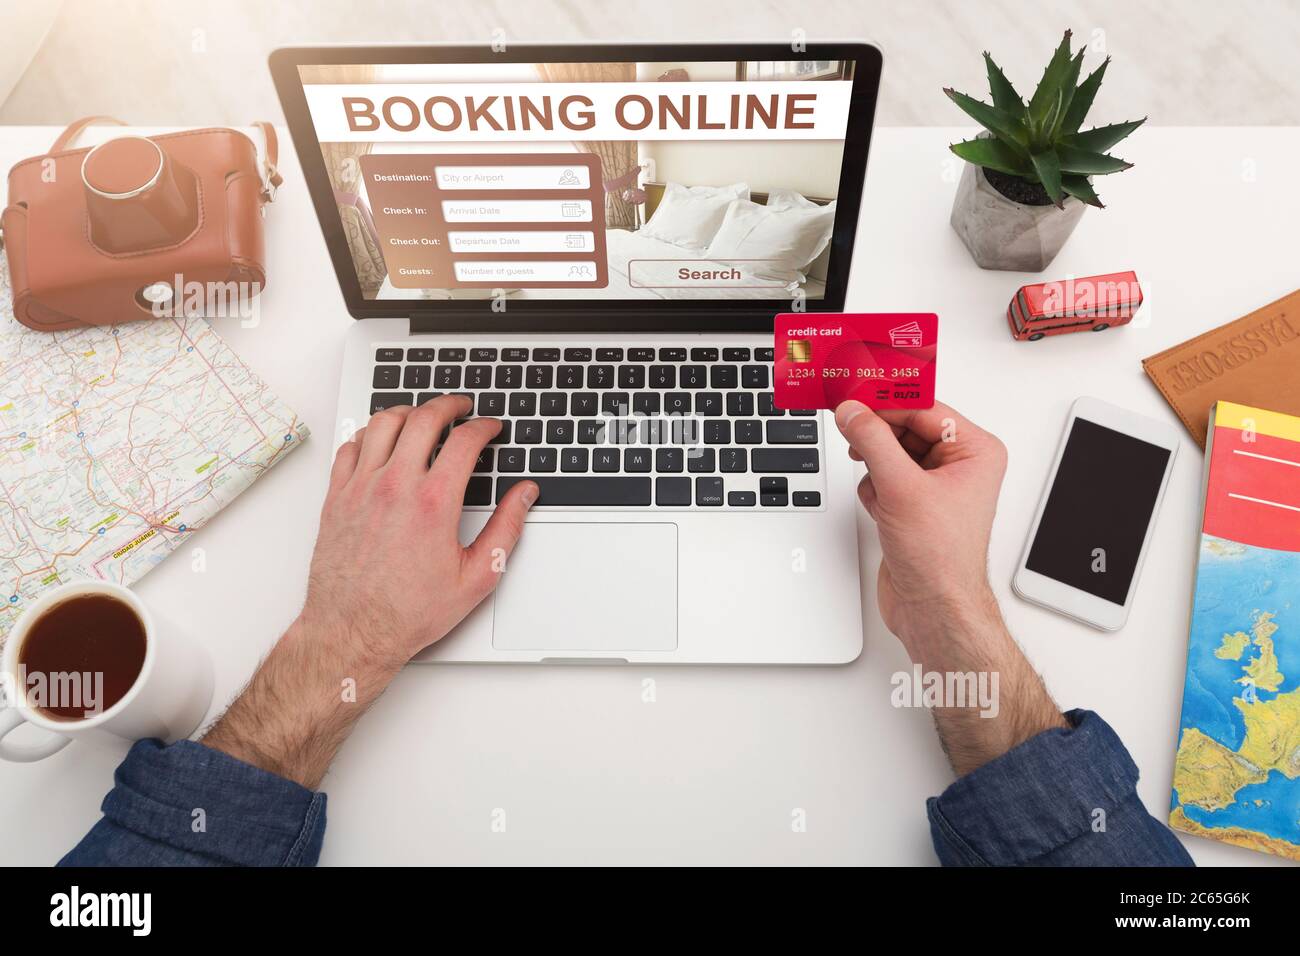 Unrecognizable man making hotel reservation online, using booking website Stock Photo